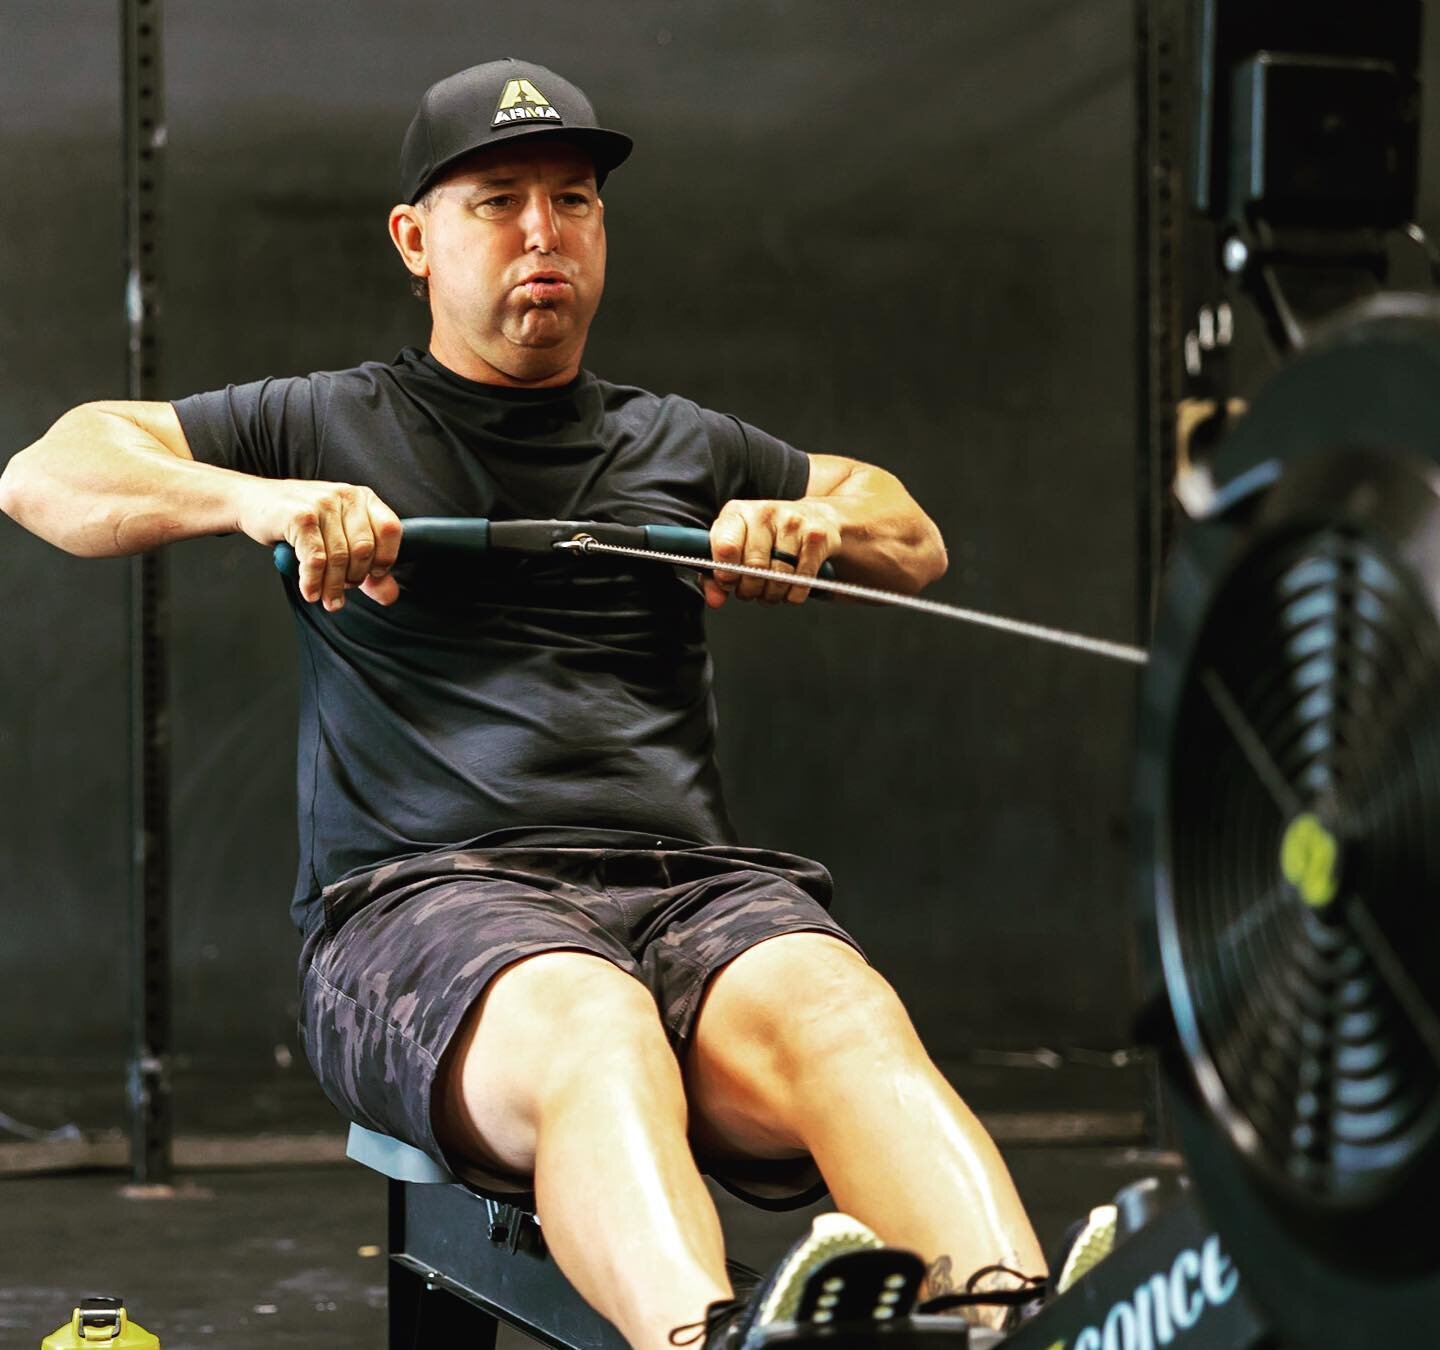 Let's row! We may need some pre-workout for this one. 
Thursday
8/10/2023
Strength:
&quot;STRENGTH
Take 15-20 Minutes to Complete...
Back Squat
6-6-3-2&quot;
WOD:
&quot;5000m Row Time Trial

📸Kevin_delfuego